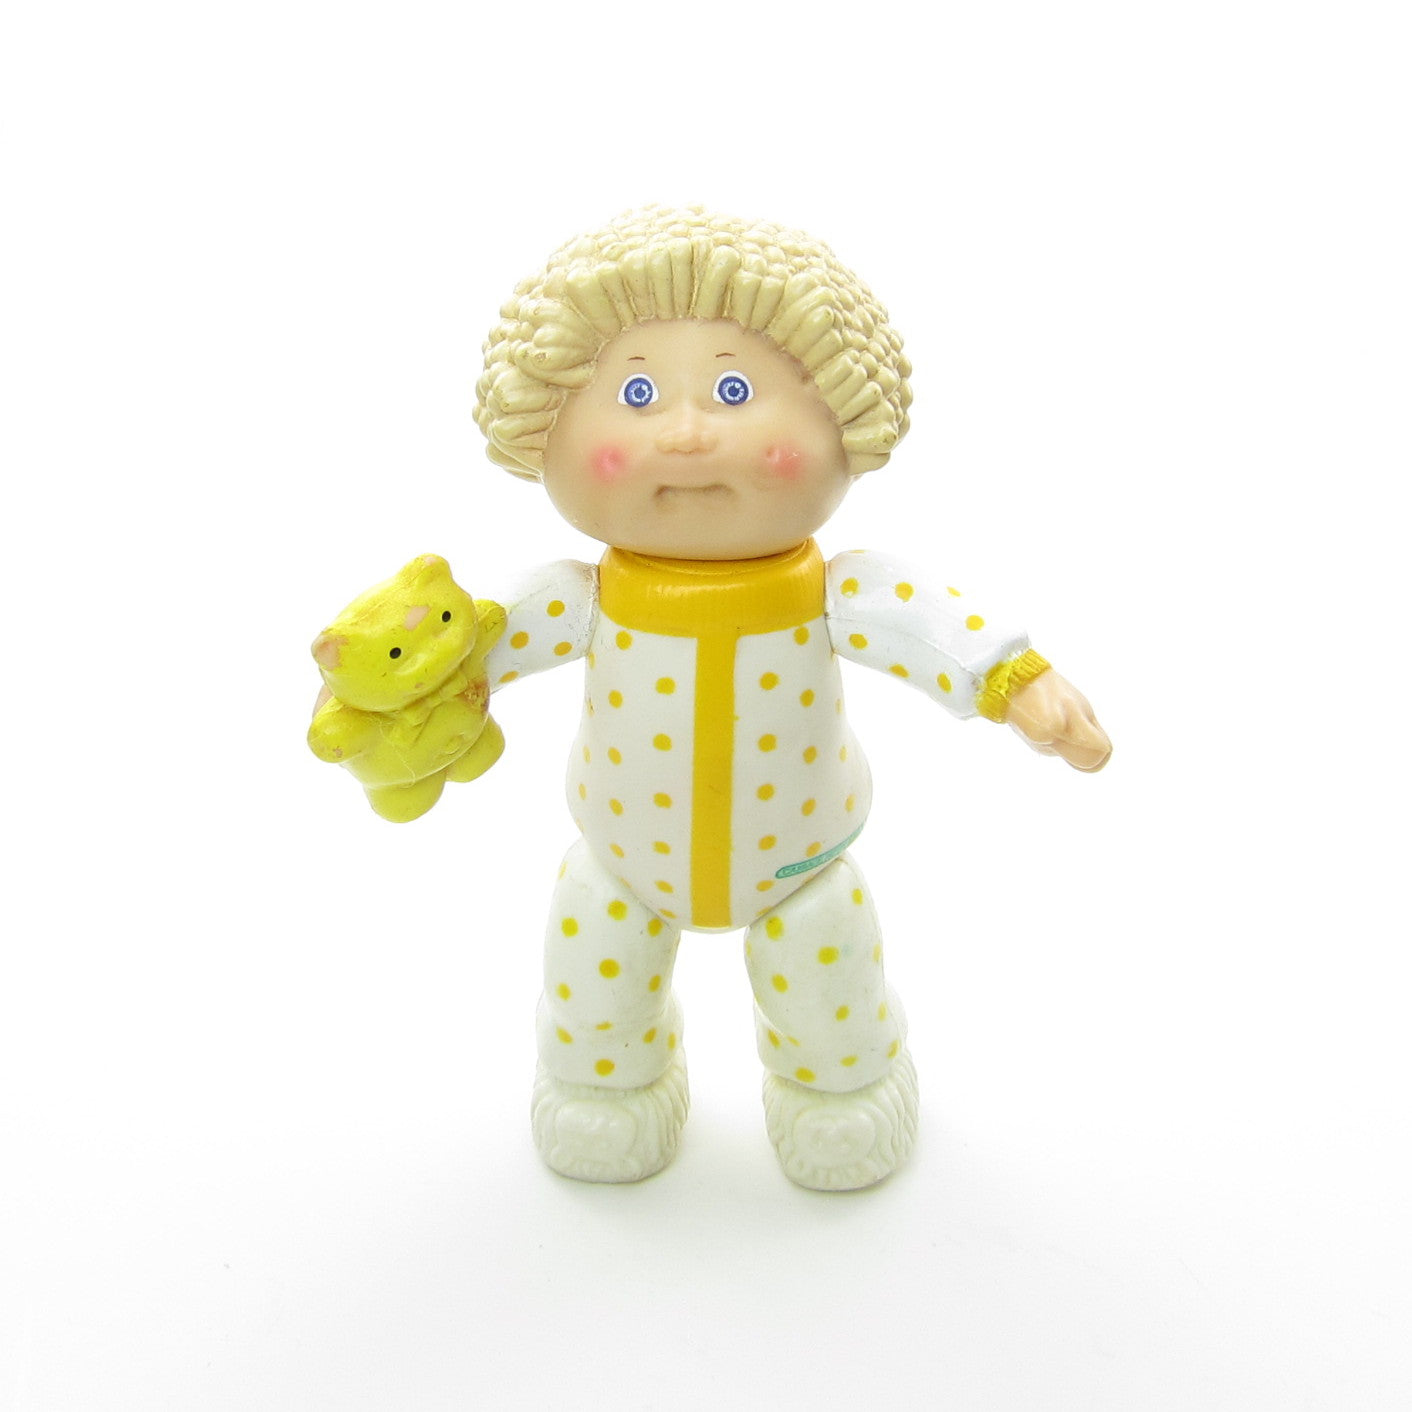 cabbage patch kids poseable figure